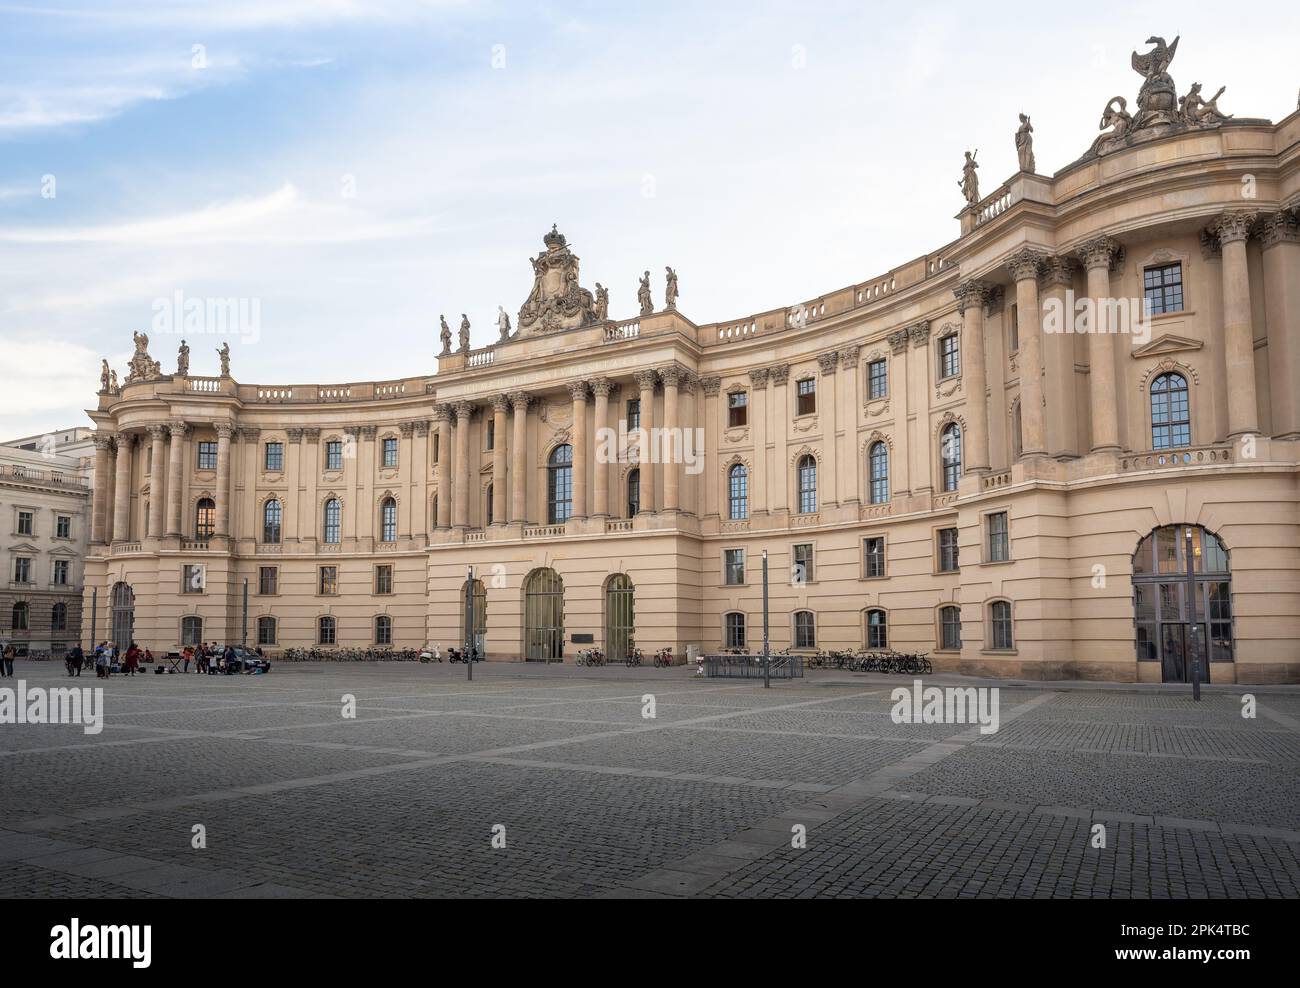 Old Royal Library - Humboldt University Faculty of Law at Bebelplatz Square - Berlin, Germany Stock Photo